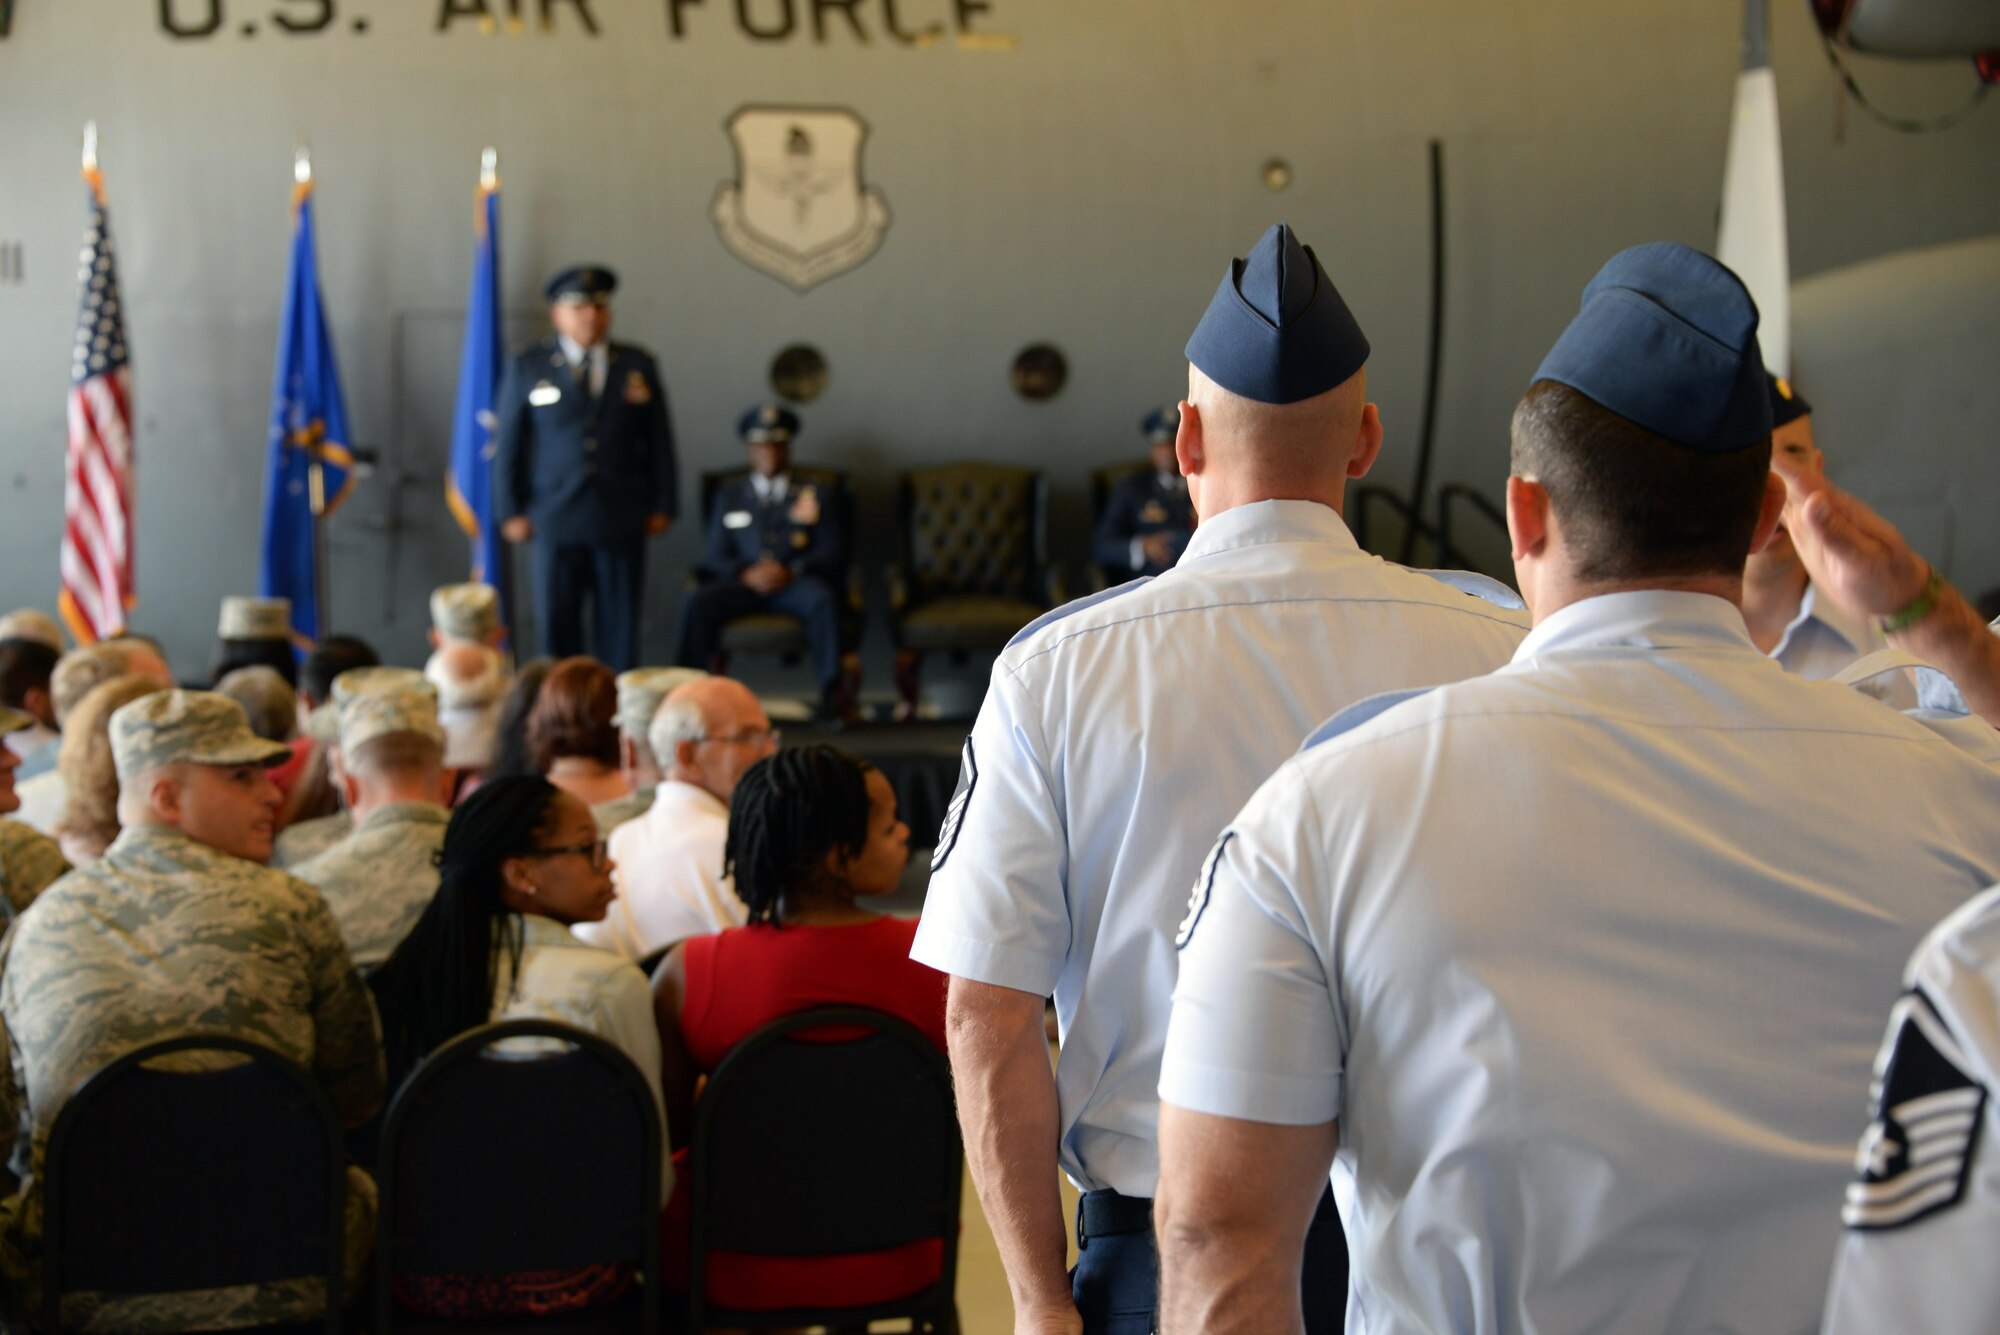 Members of the 982nd Training Group render their first salute to their new commander, Col. Anthony Puente, during a Change of Command ceremony July 7, 2017. (U.S. Air Force photo by Robert L. McIlrath)